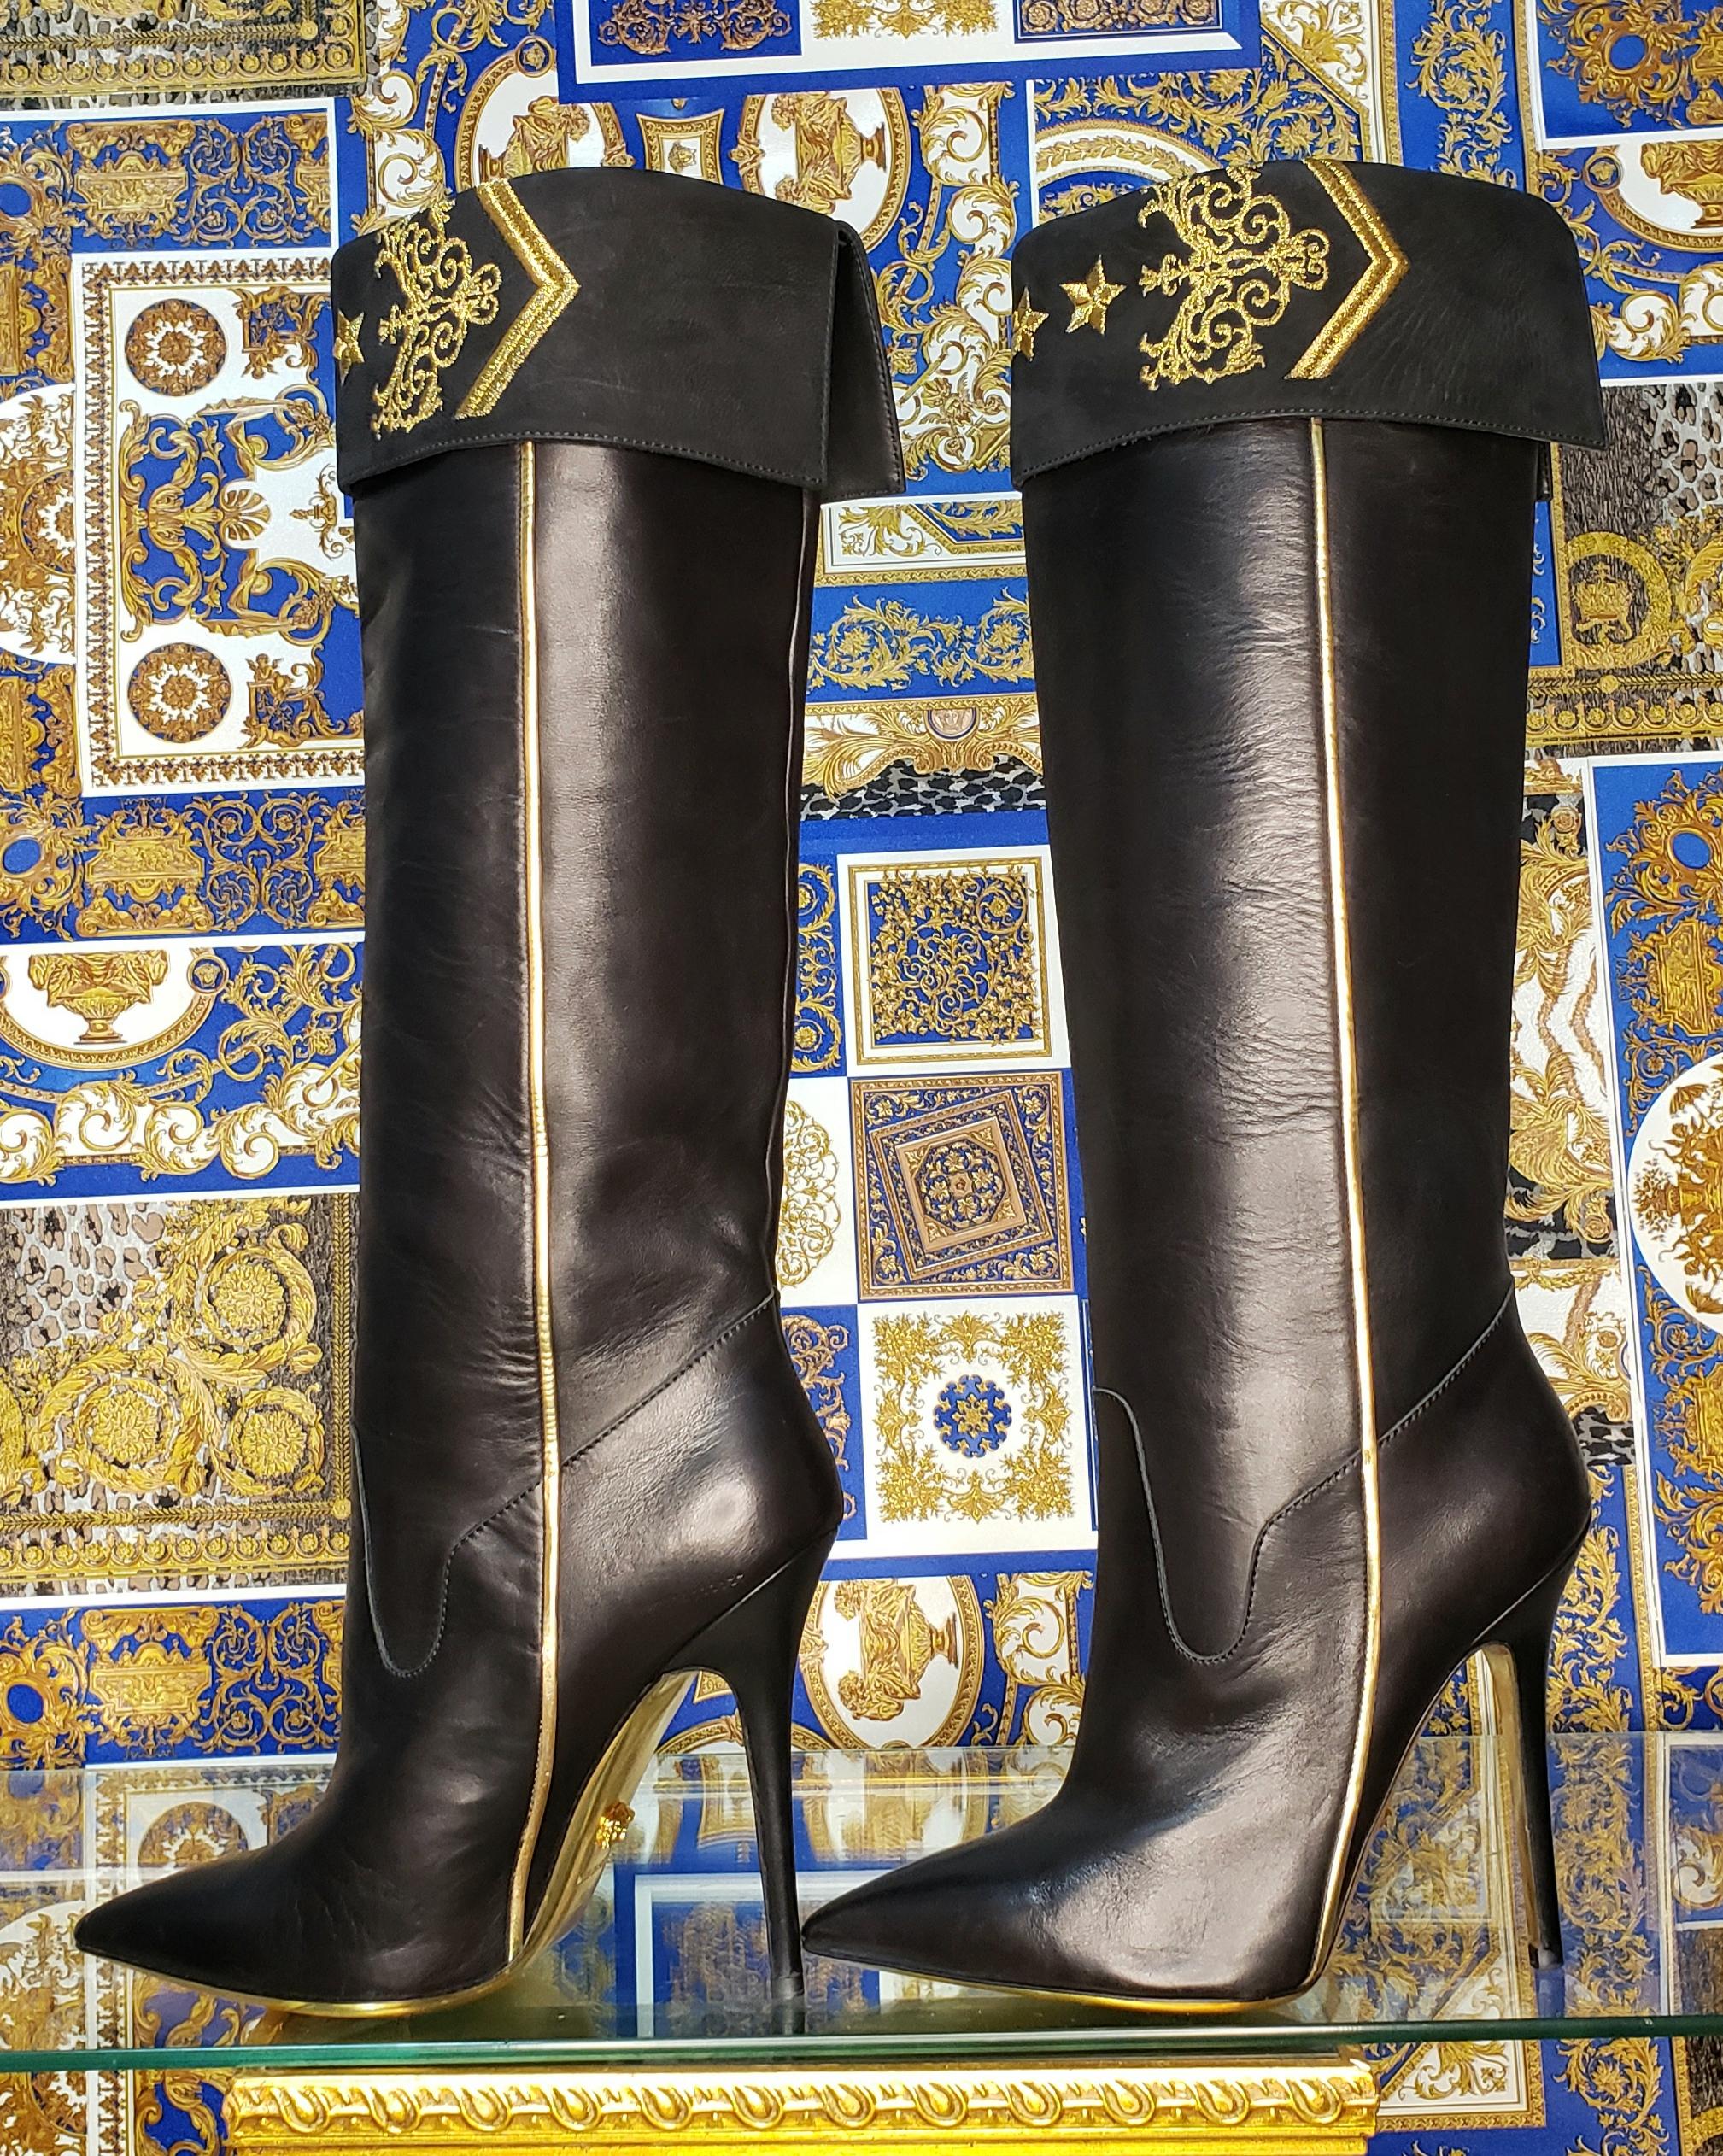 VERSACE



Actual PR-sample Pre-Fall 2013 Look # 8 



Black leather knee boots



Pointed toe,  metallic trim, gold embroidery and a tonal covered stiletto heel.



Pull on



Content: 100% Leather

Sole: Leather 



Heel height approx. 5